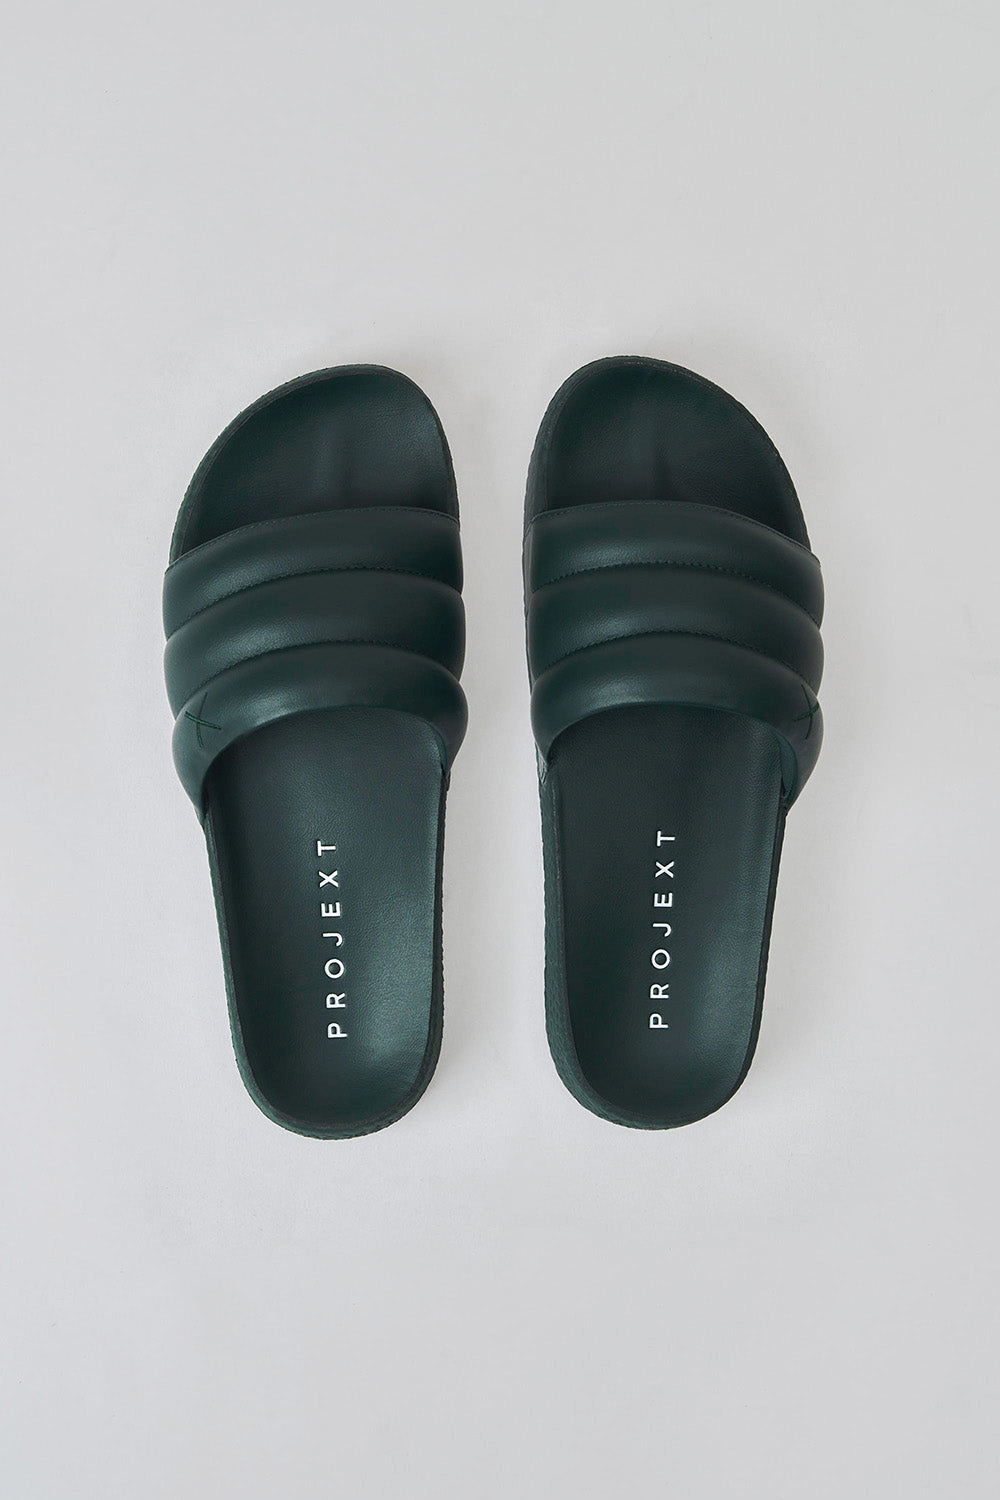 » Scooter Slides Olive Women (Discount)